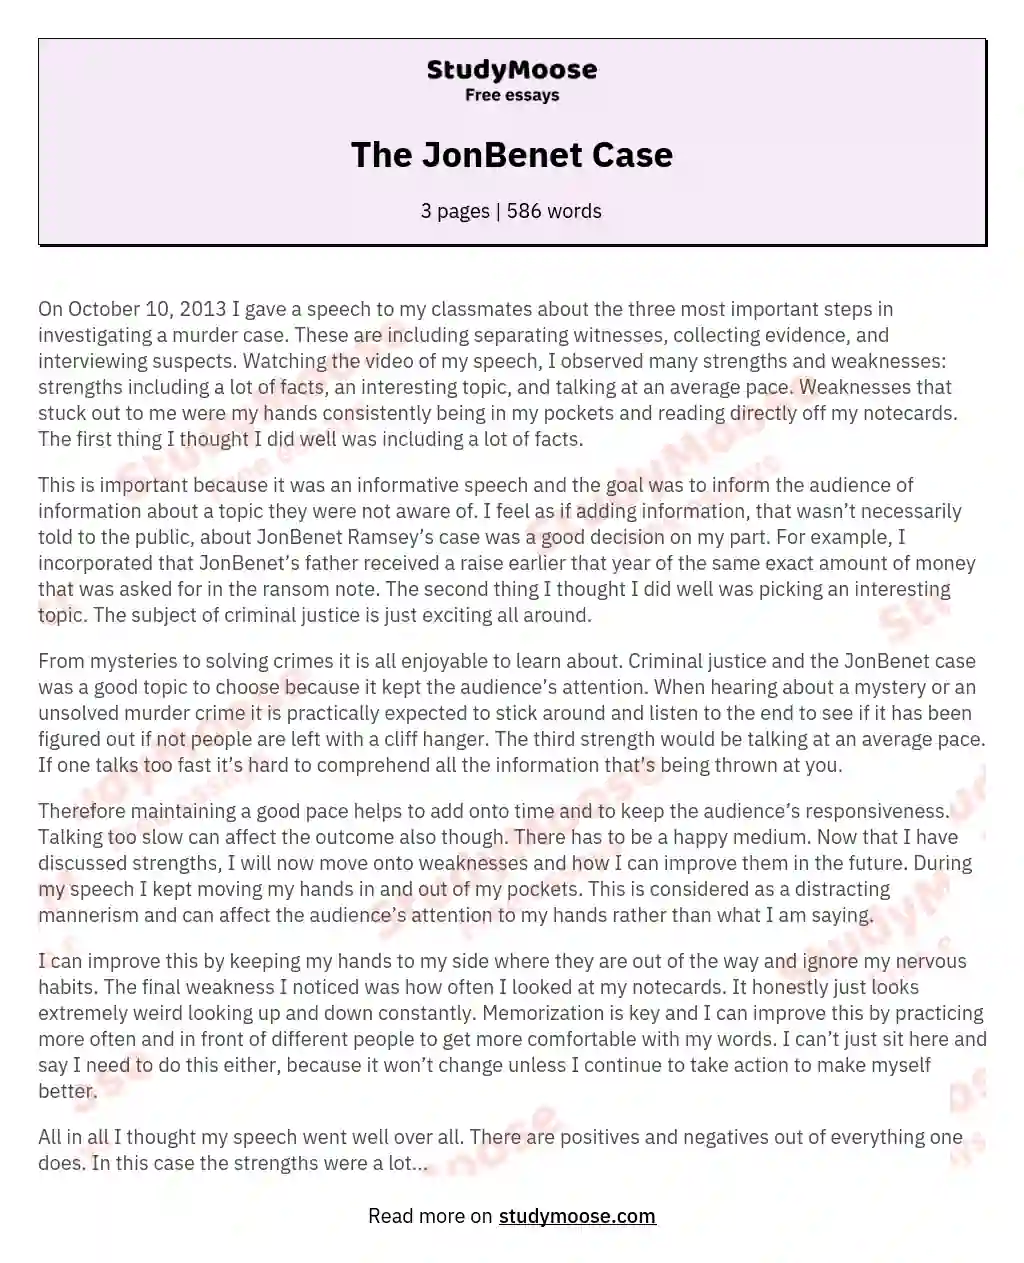 Analyzing the Art of Investigating Murder Cases essay